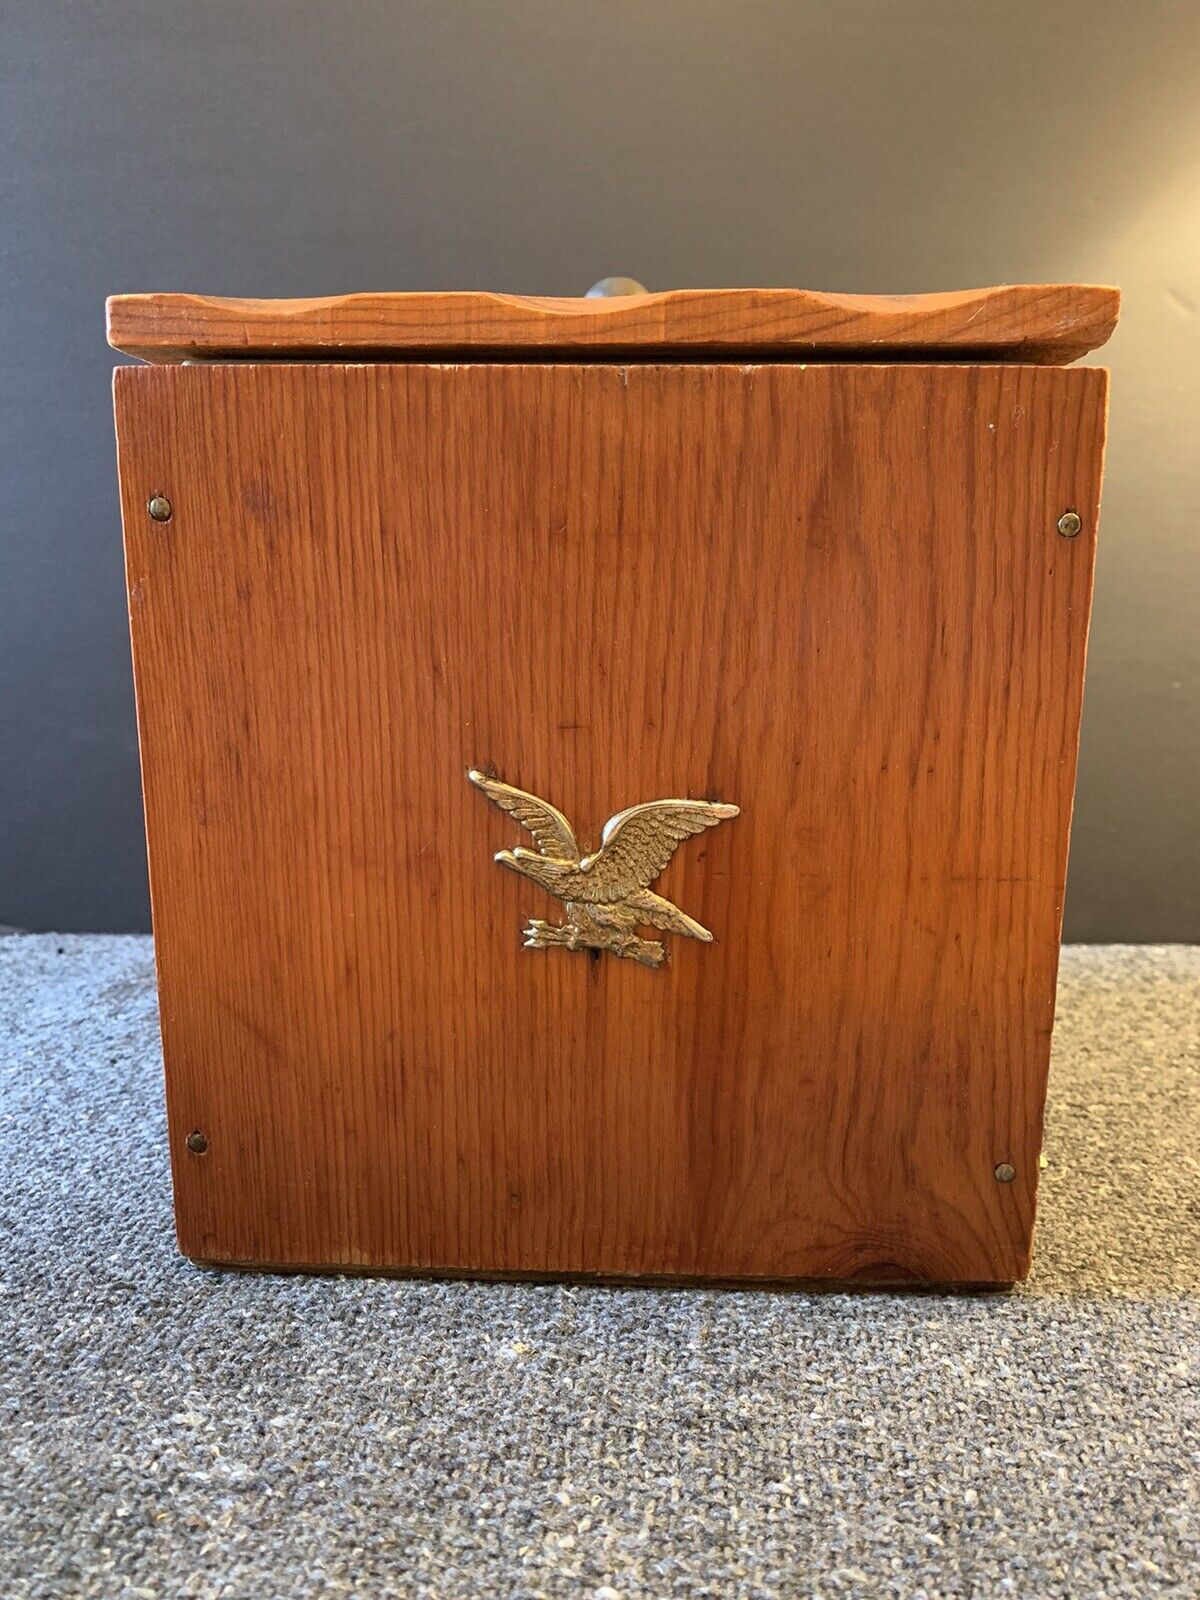 Vintage Wooden Ice Bucket With Eagle Emblem With Liner